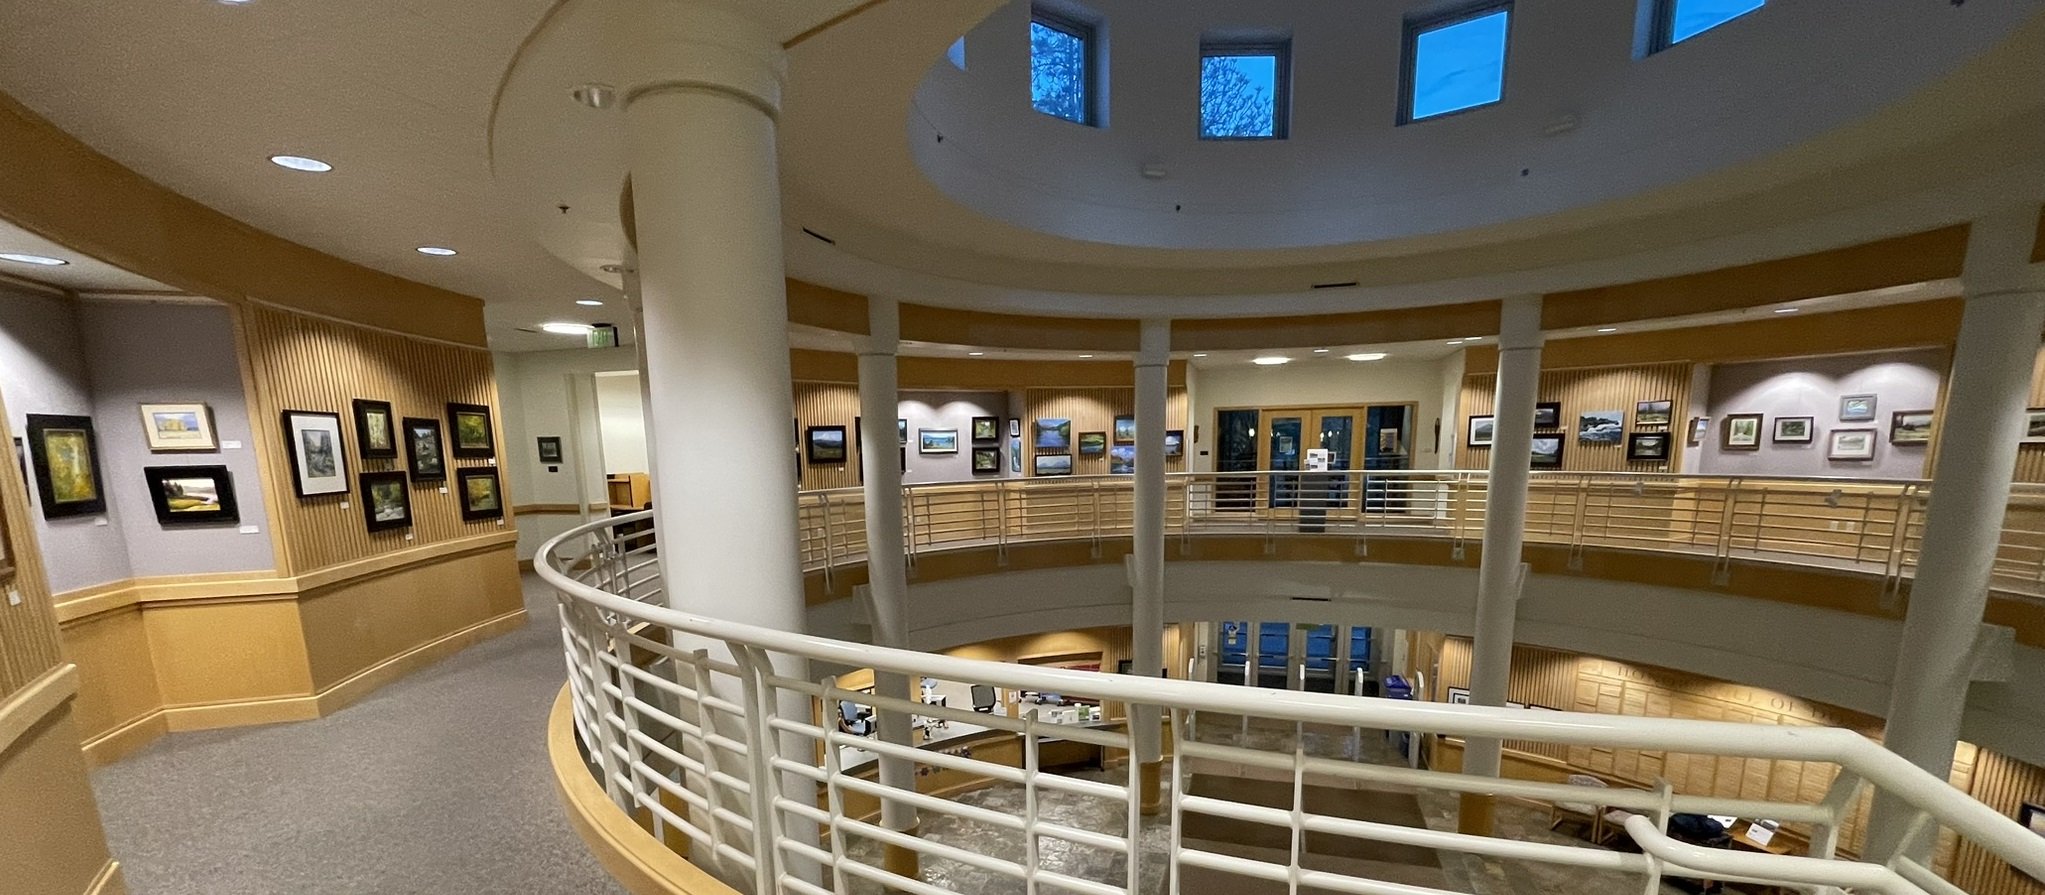 Wide view of the rotunda gallery. No art work is in focus.